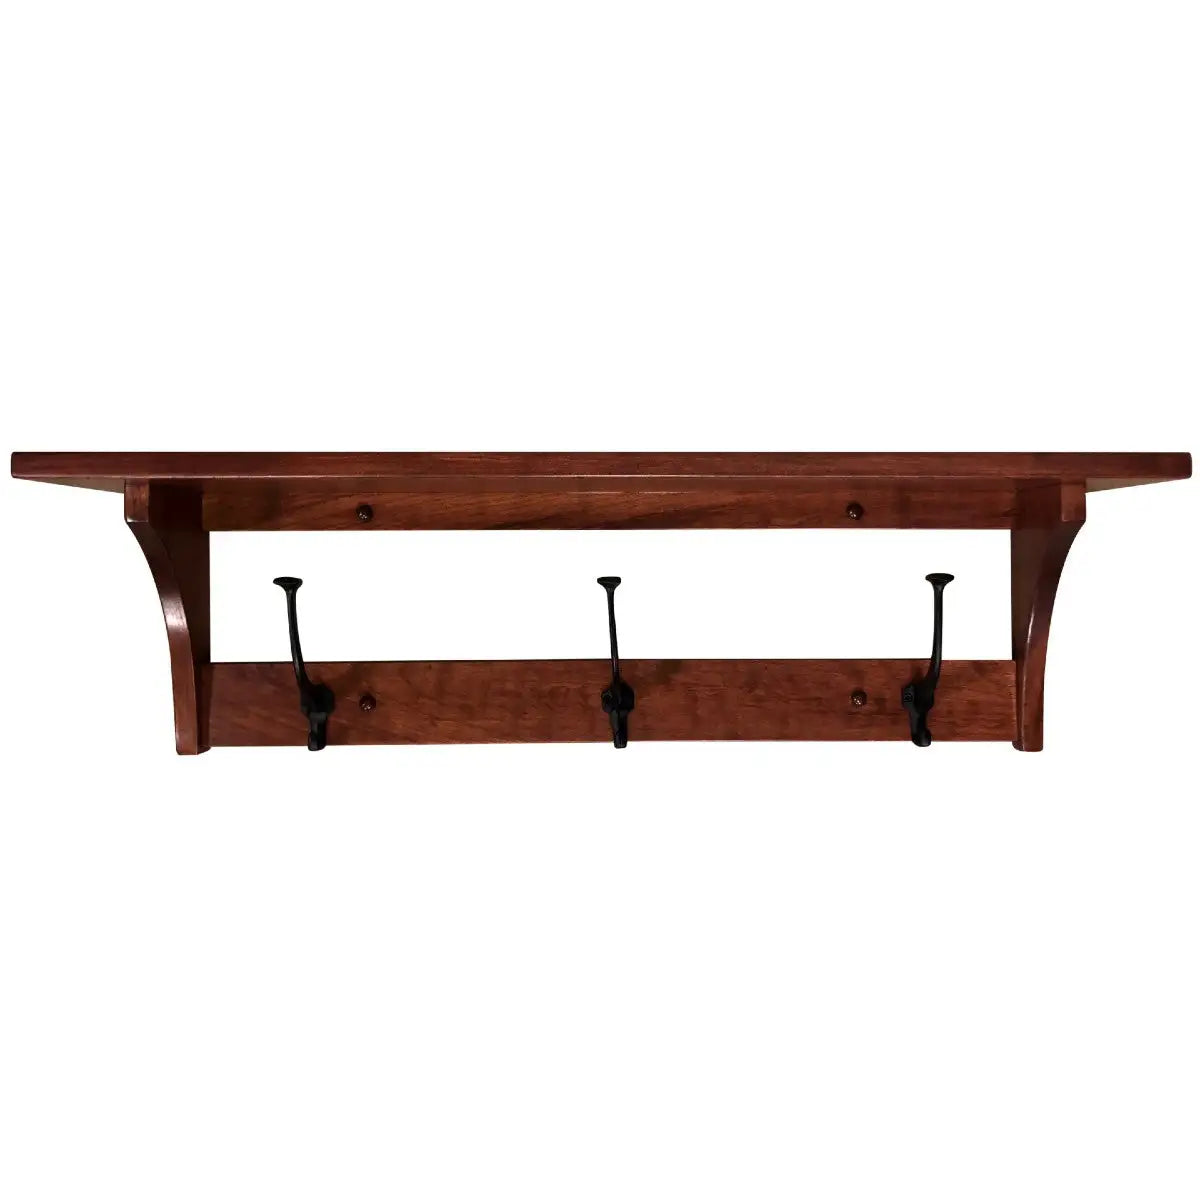 Wall Mount Shelf with Hooks Entryway Shelf with Storage Cabinets Coat Rack  Brown